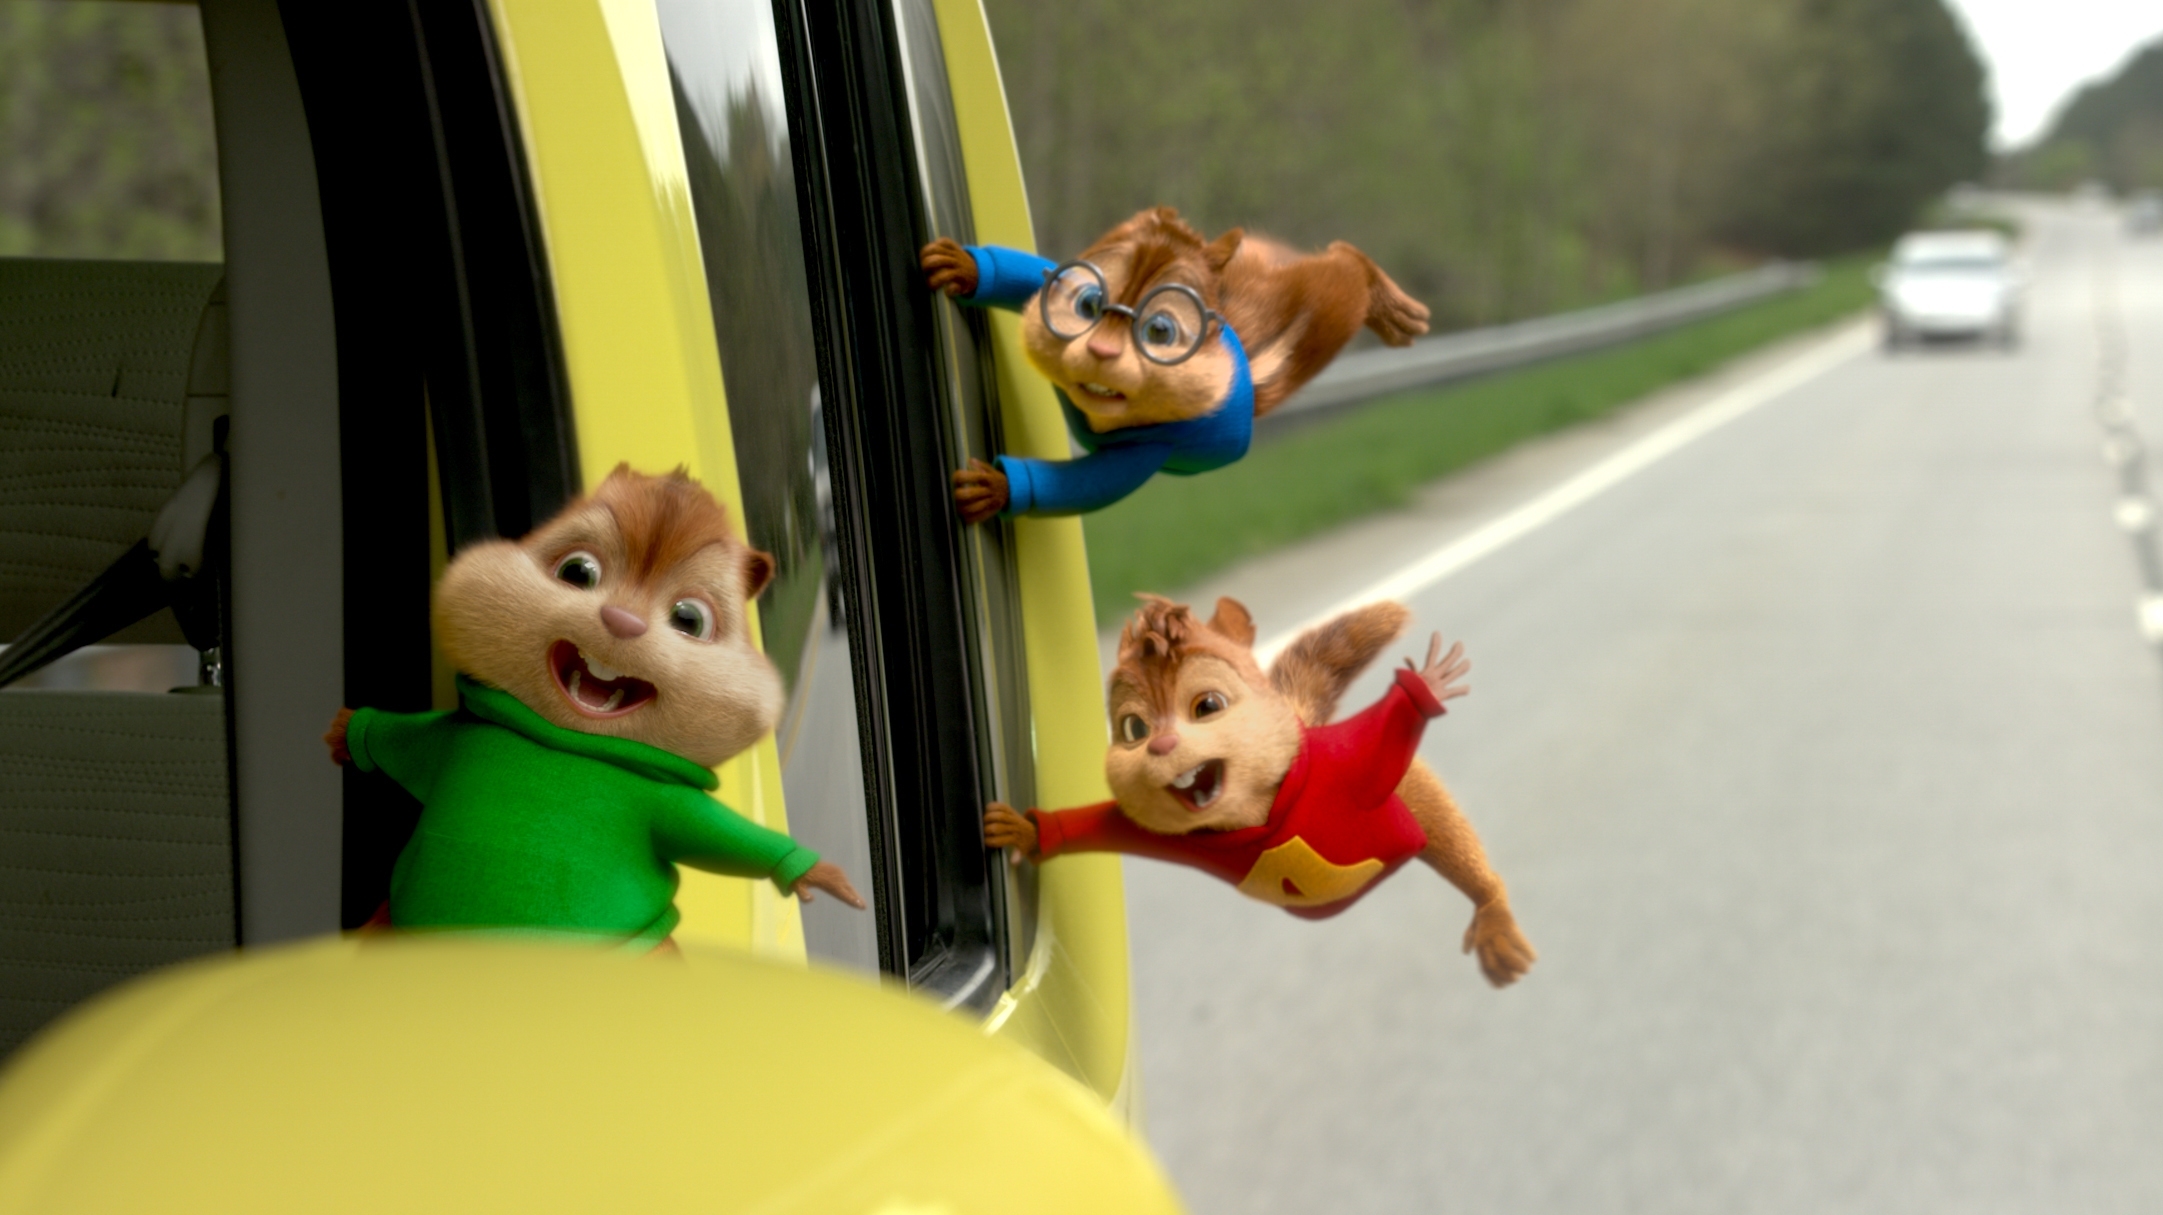 Alvin and the Chipmunks: The Road Chip